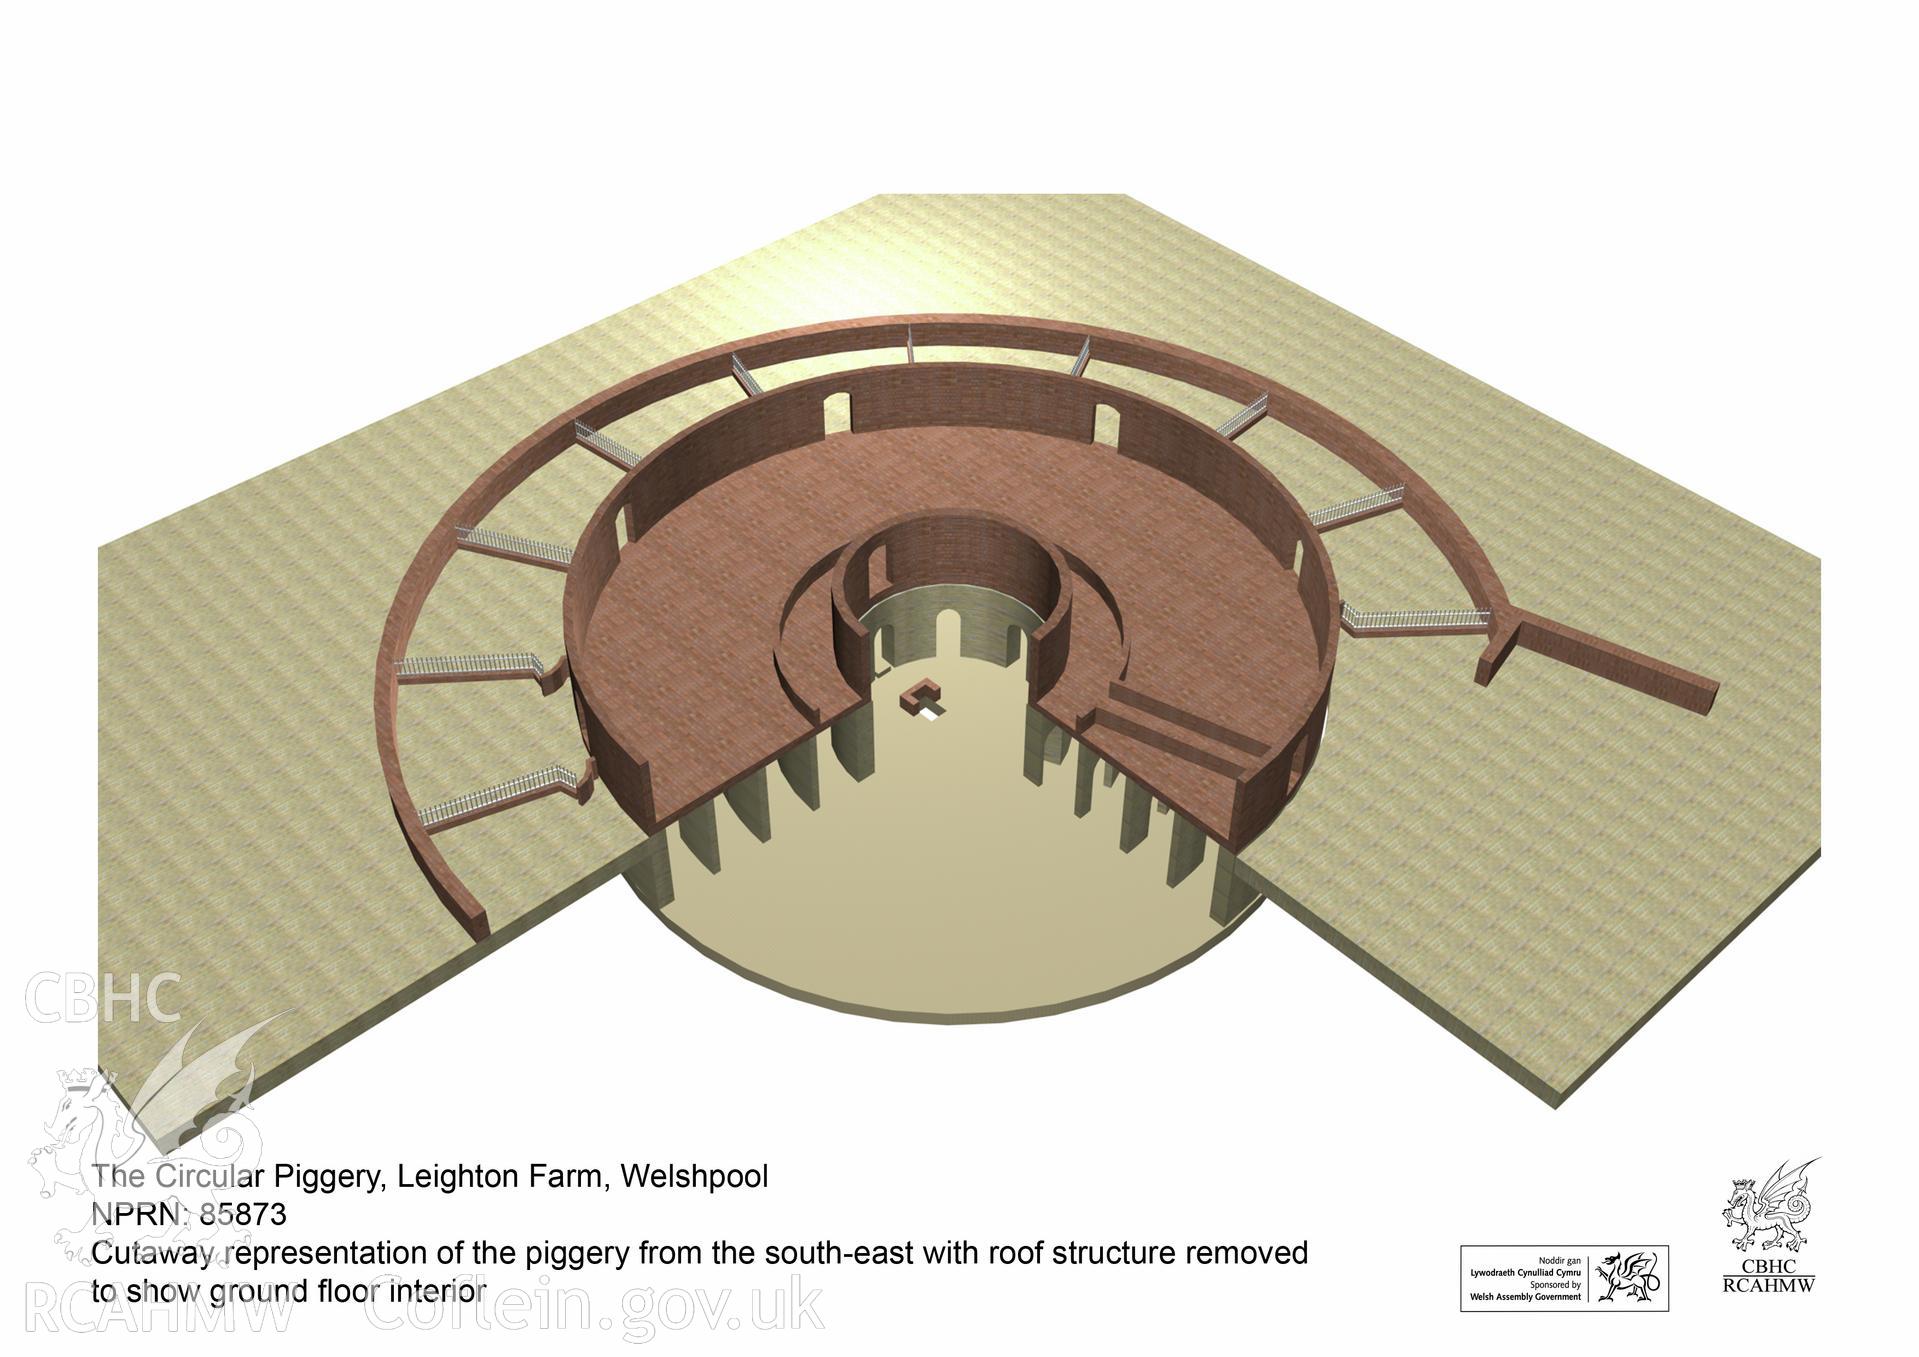 Still taken from a 3D Studio Max model showing the circular piggery in a cutaway view from the south-east, with the roof structure removed, from an RCAHMW digital survey of the Circular Piggery, Leighton Farm, Welshpool. Carried out by Susan Fielding, 11/08/2008.